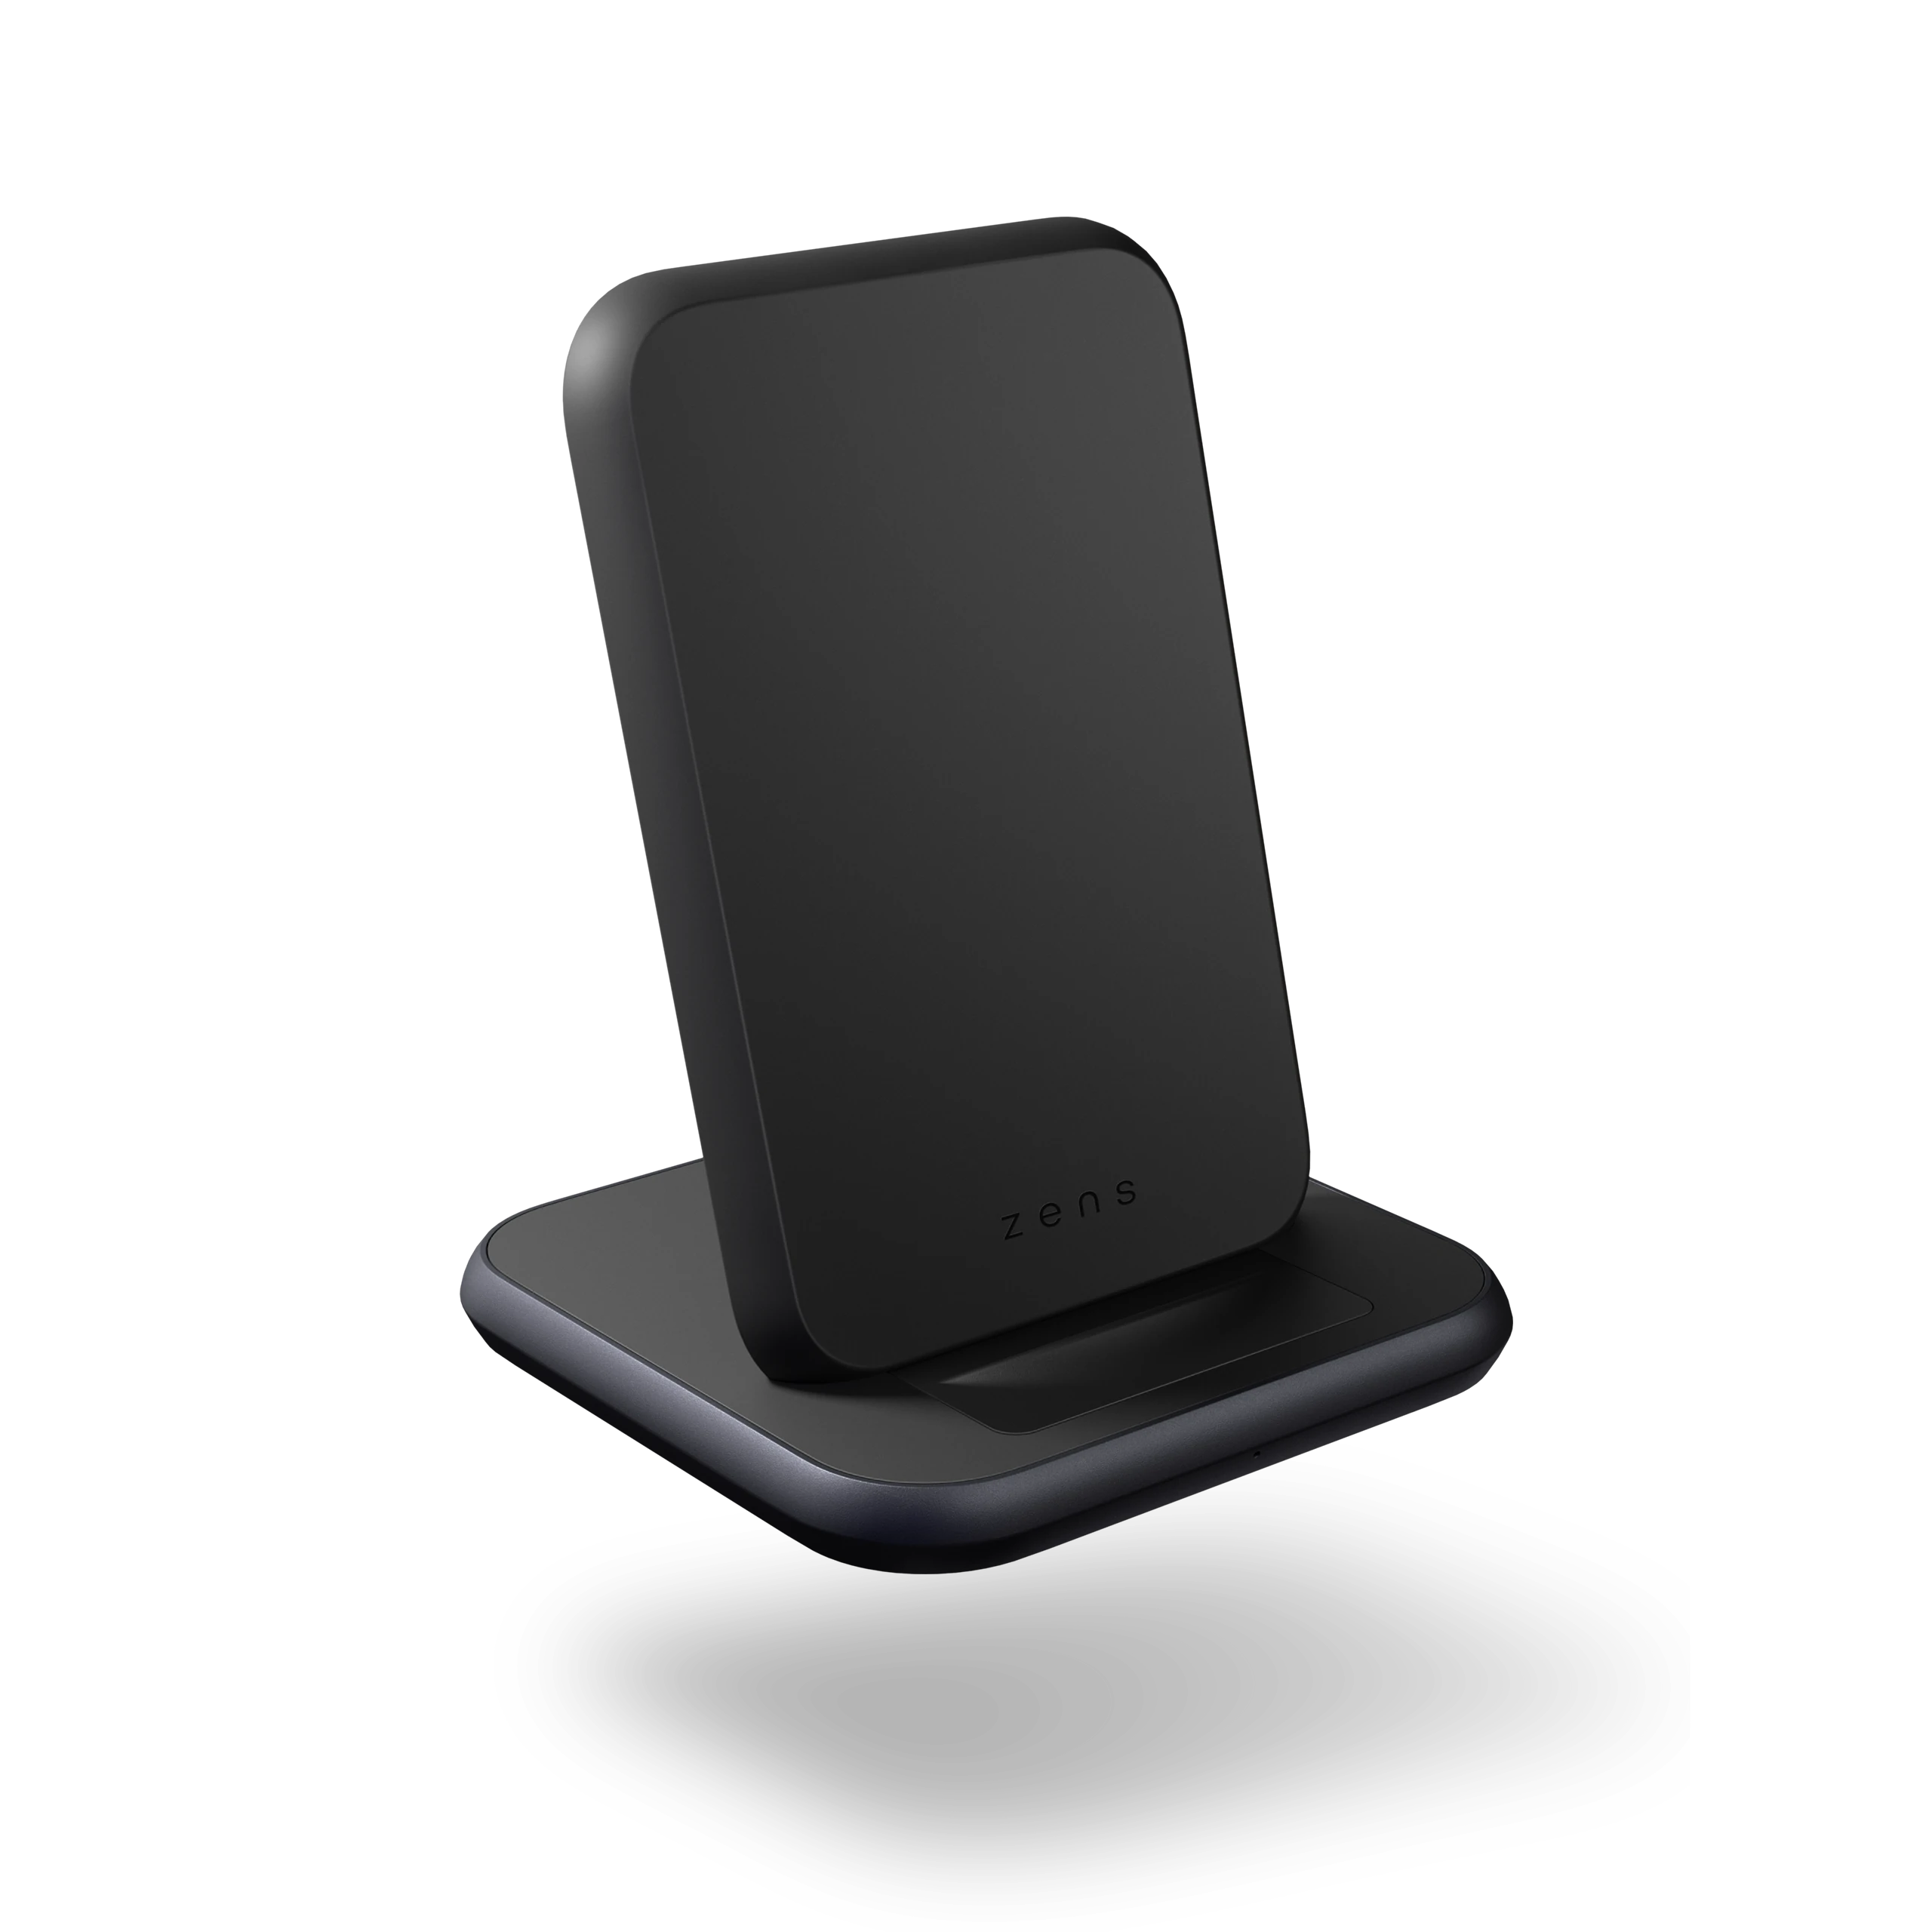 Zens Stand Aluminium Wireless Charger Black with 18W USB-C PD Wall Charger (ZESC15B/00)